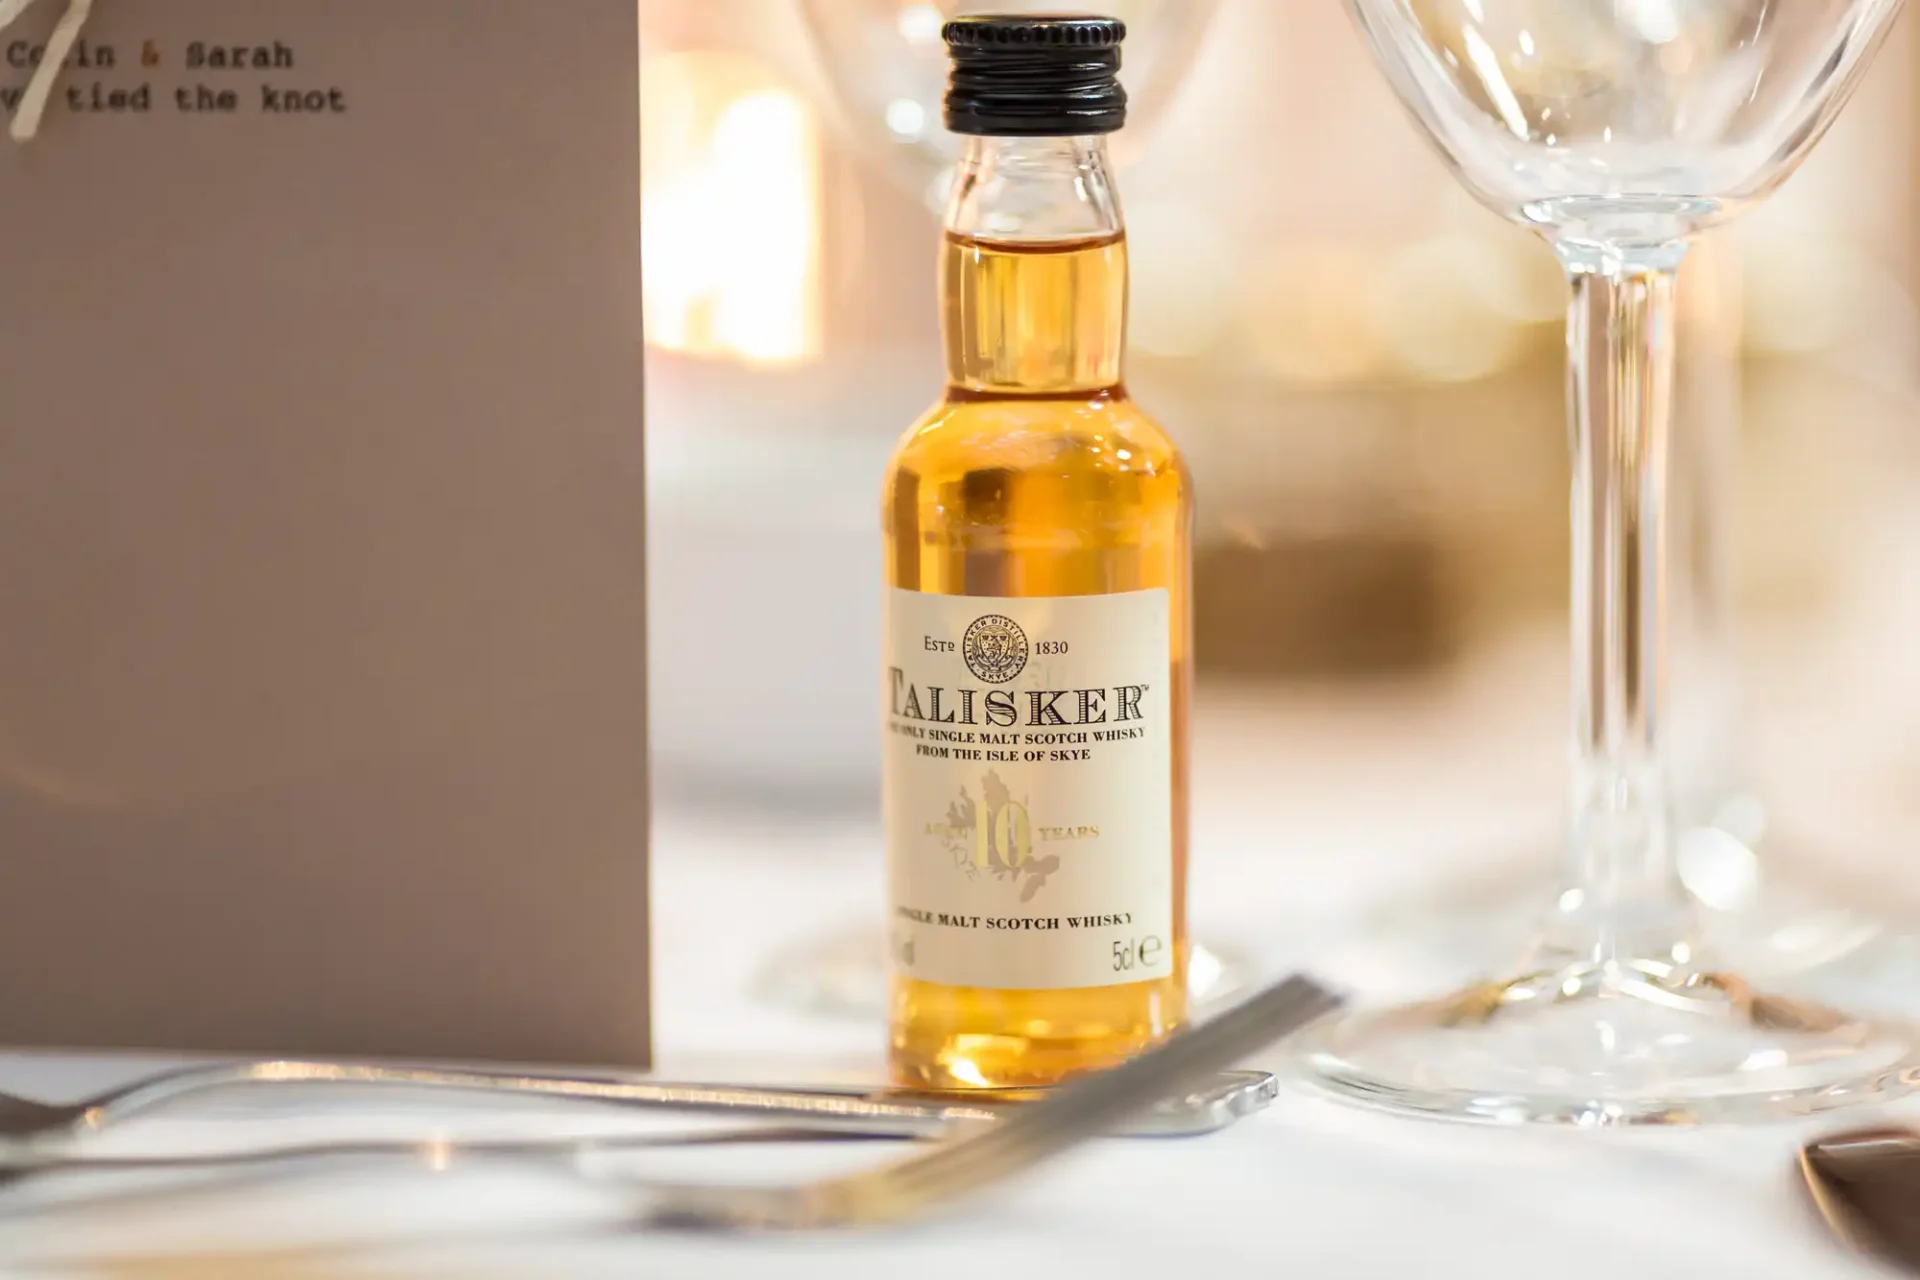 Small bottle of talisker scotch whisky on a wedding table, surrounded by elegant glassware and a menu card with names.